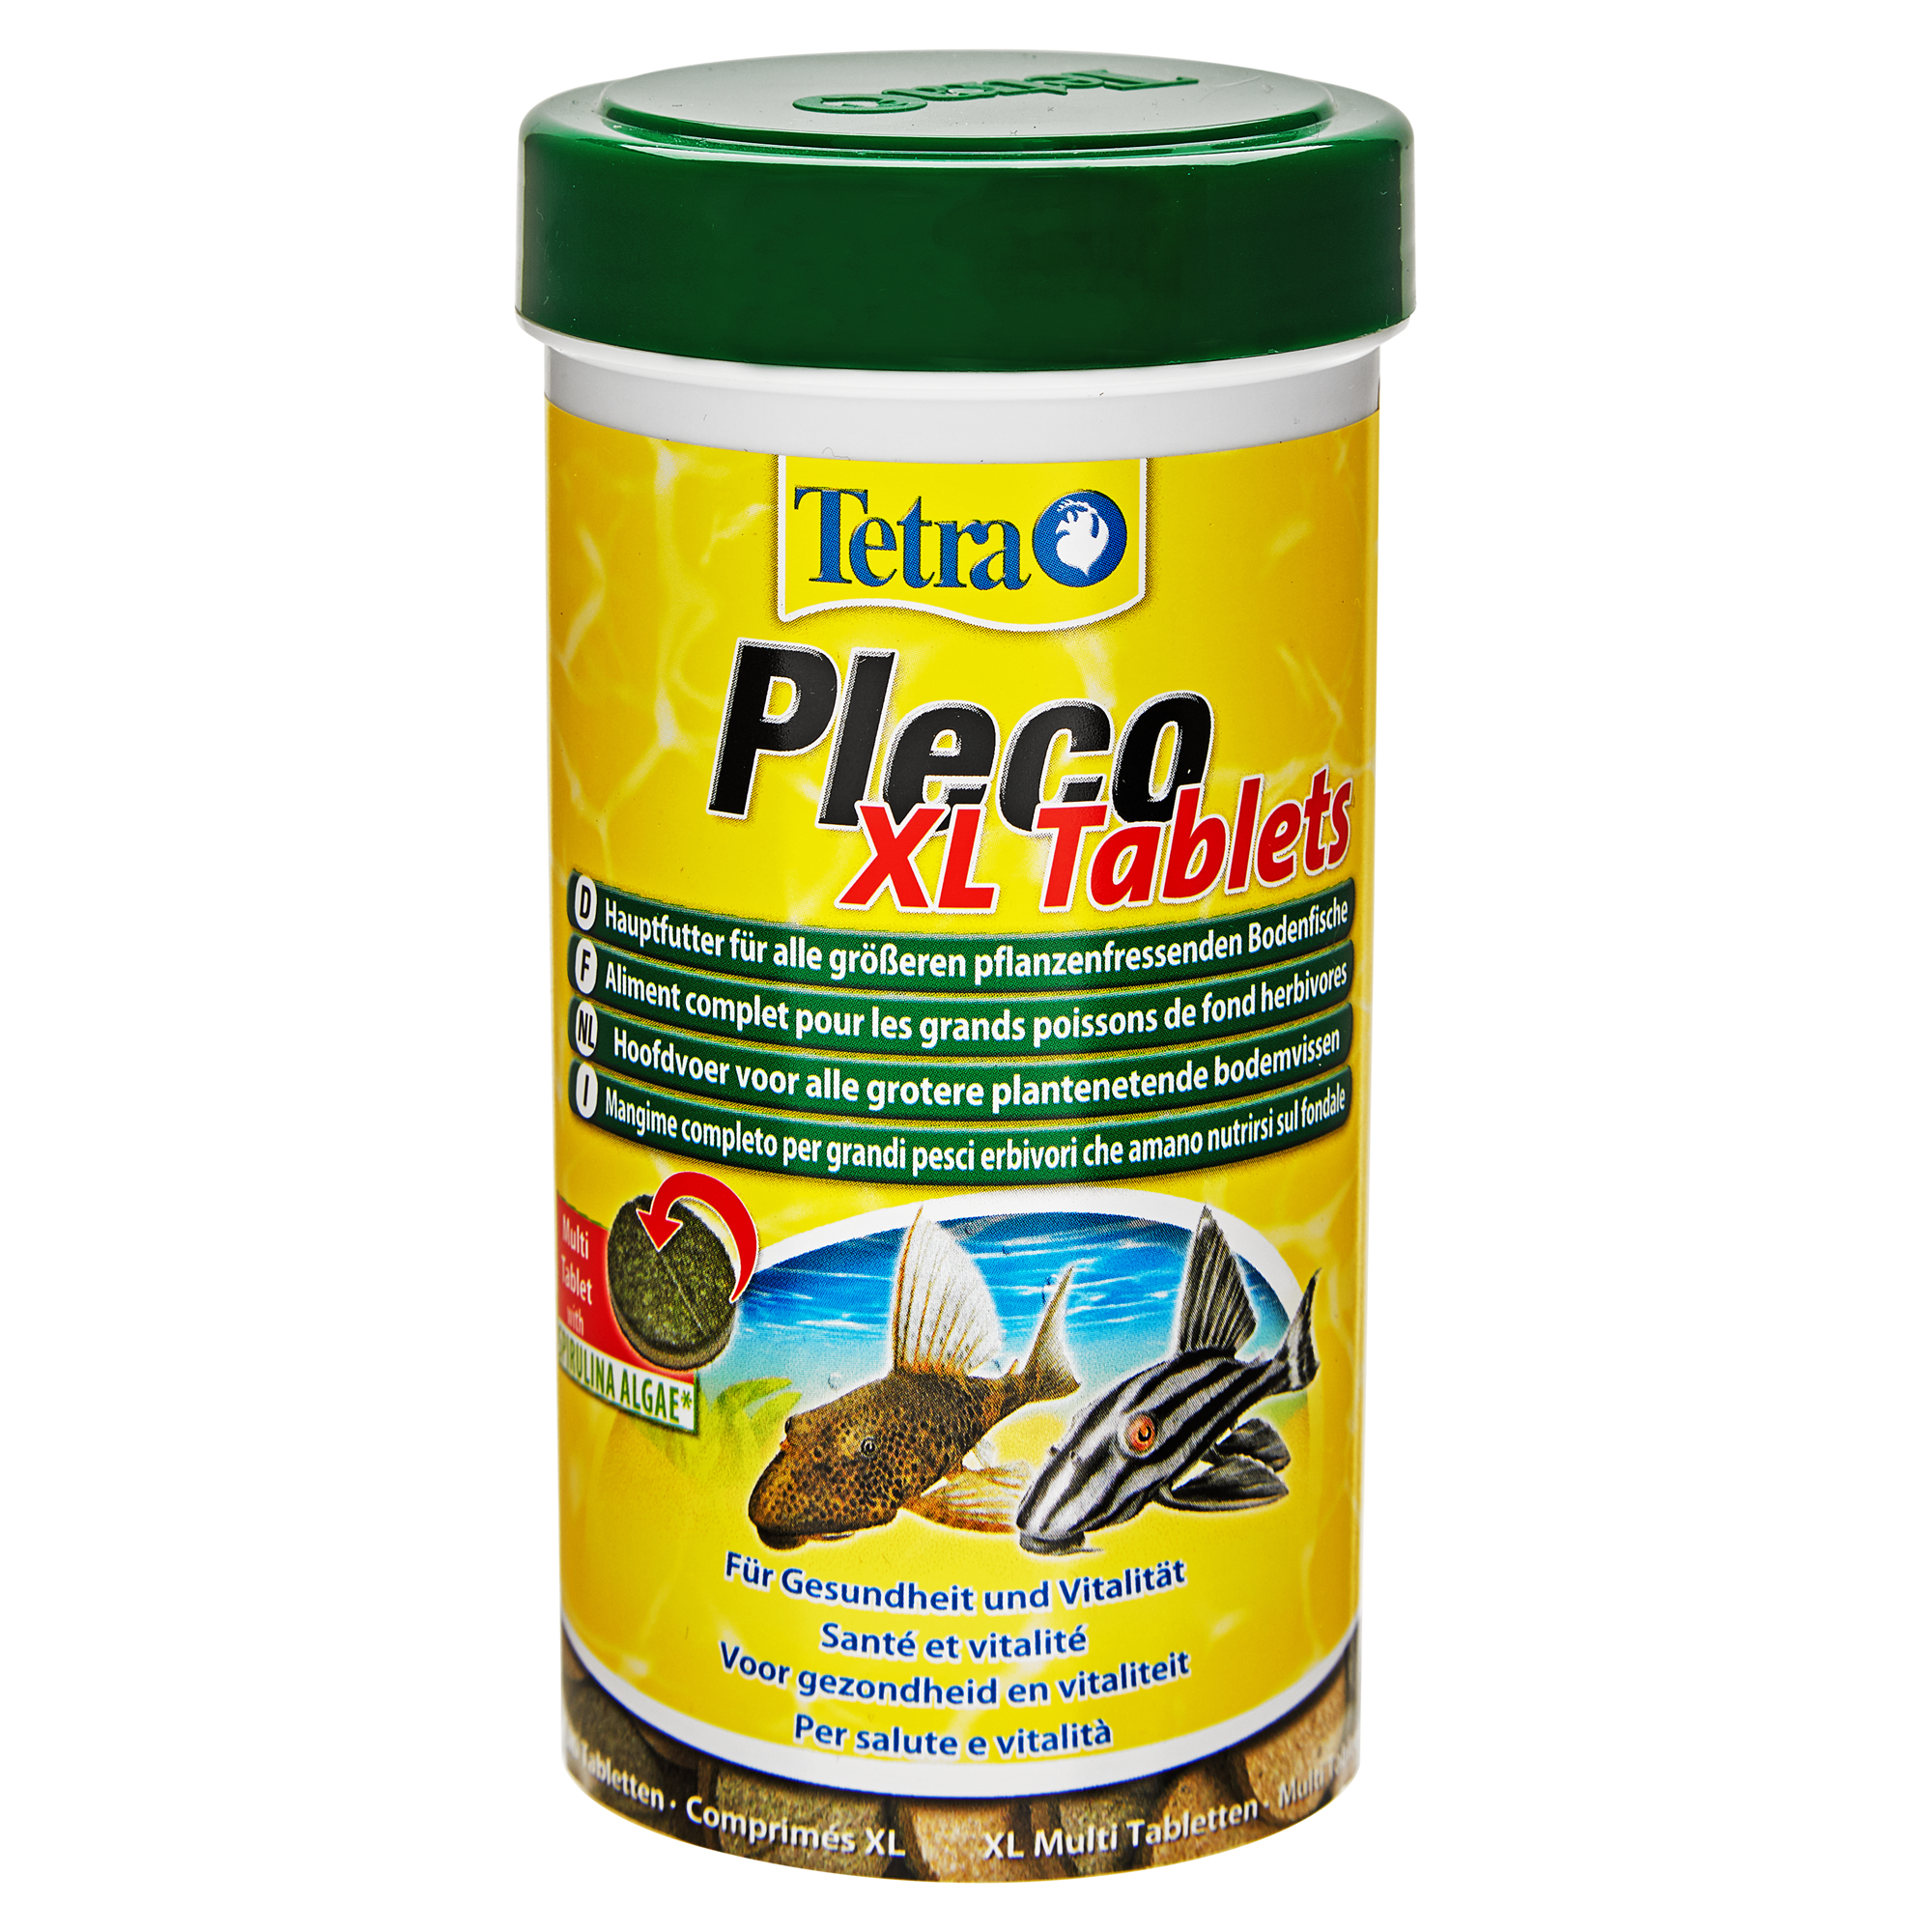 Fischfutter "Pleco" XL Tablets 135 g + product picture